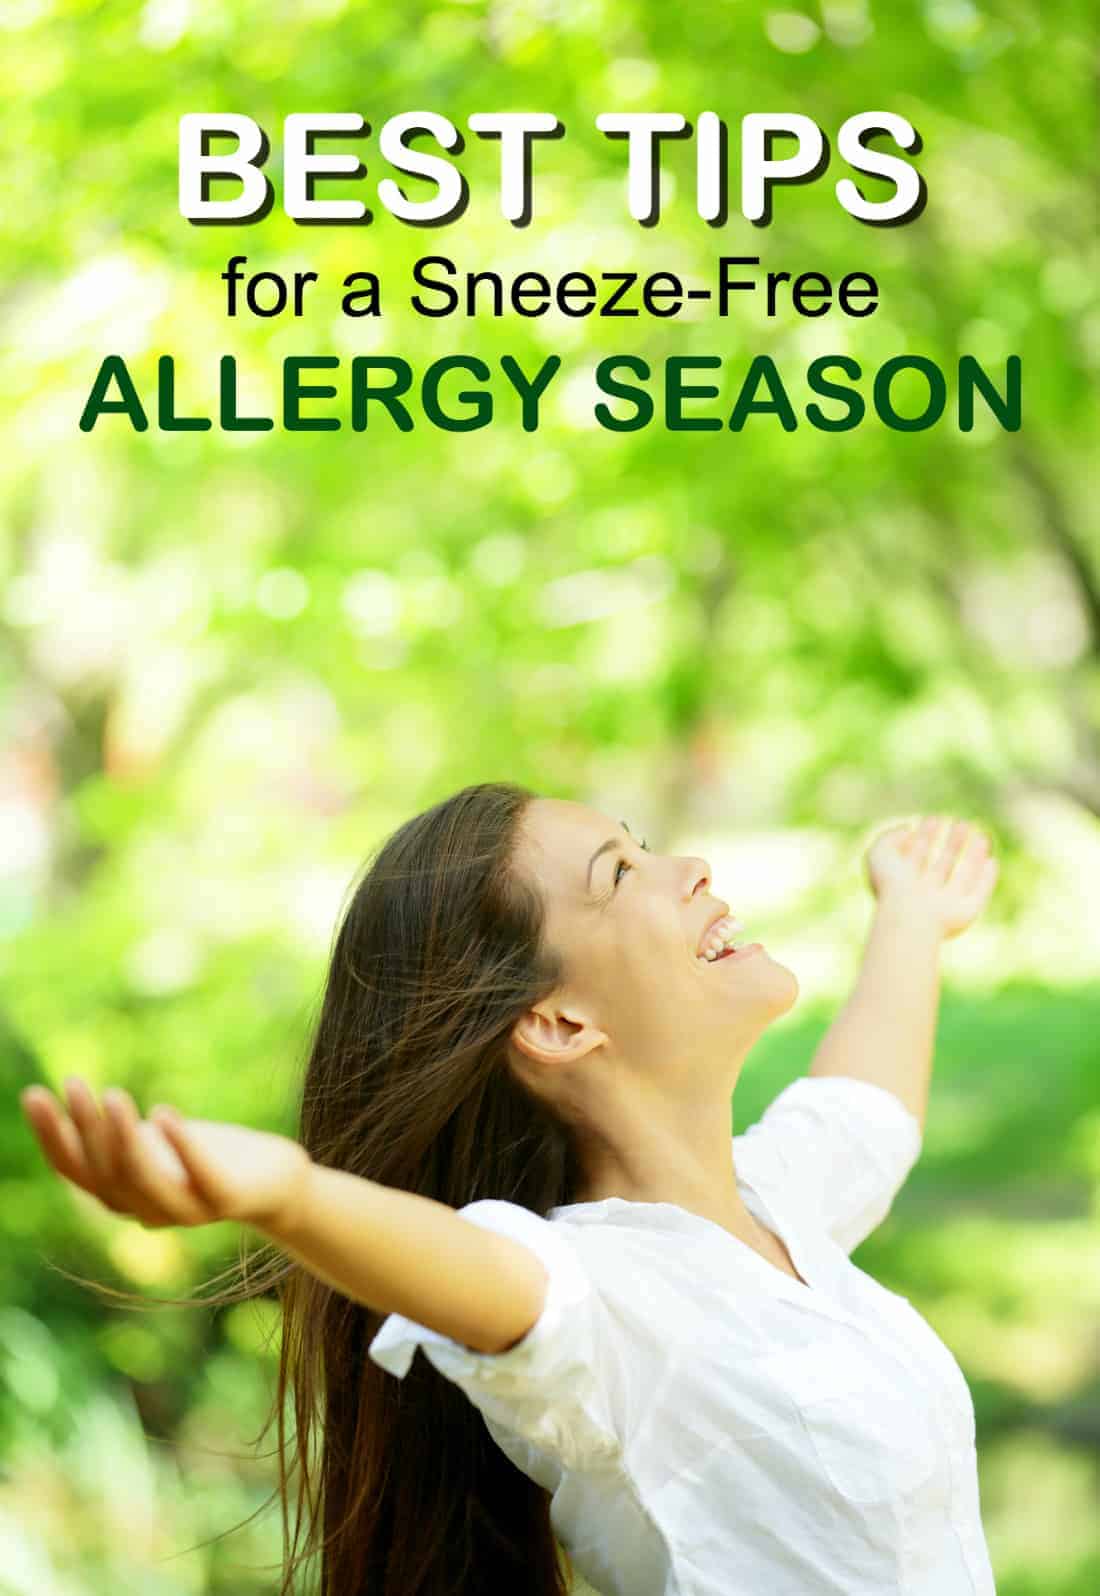 Best Tips for a Sneeze-Free Allergy Season